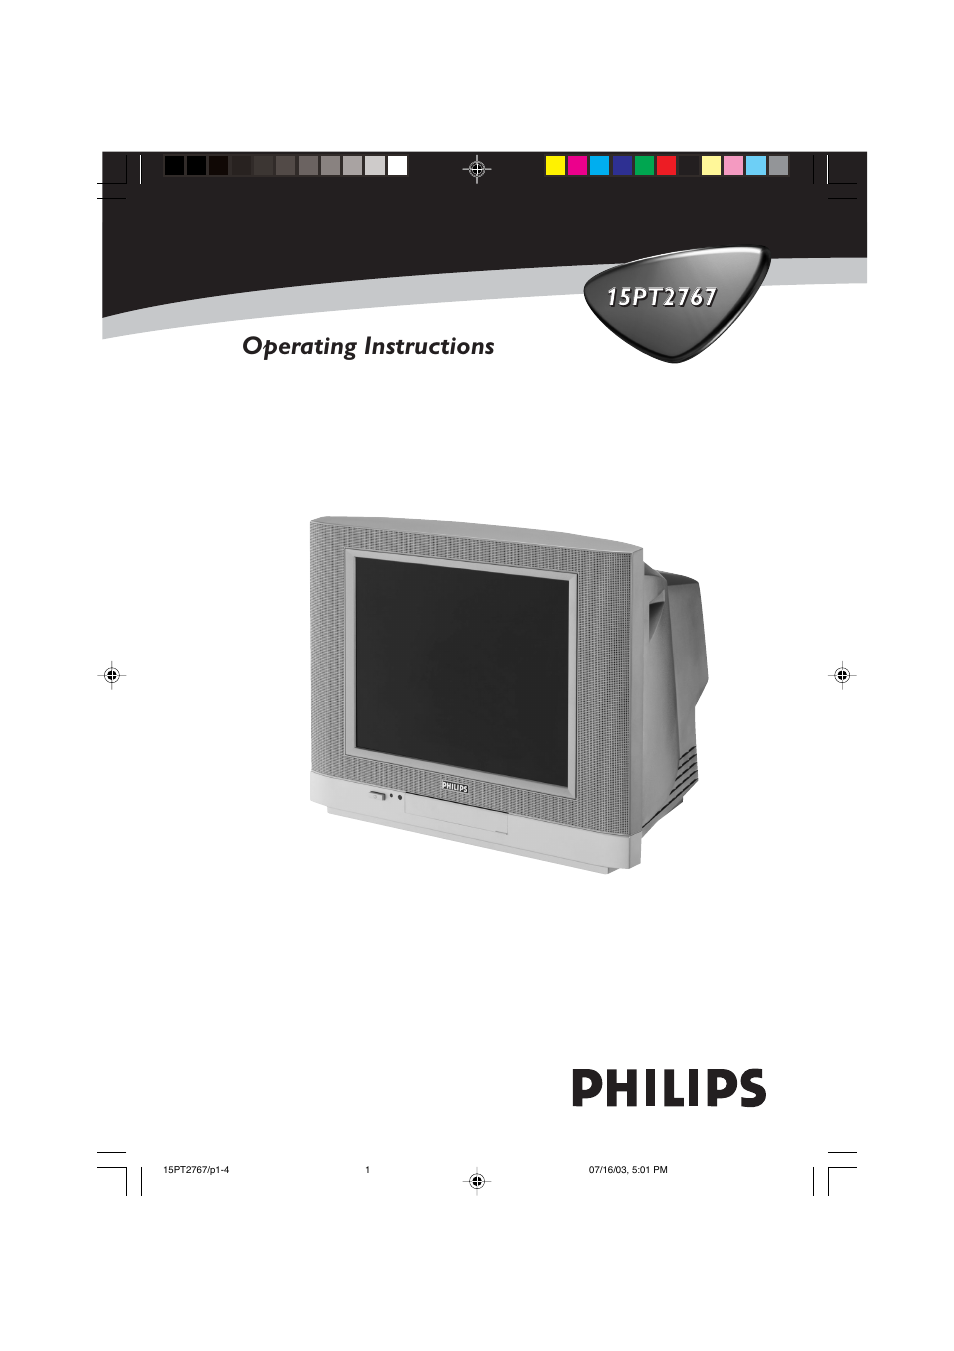 Philips 15PT2767 User Manual | 27 pages